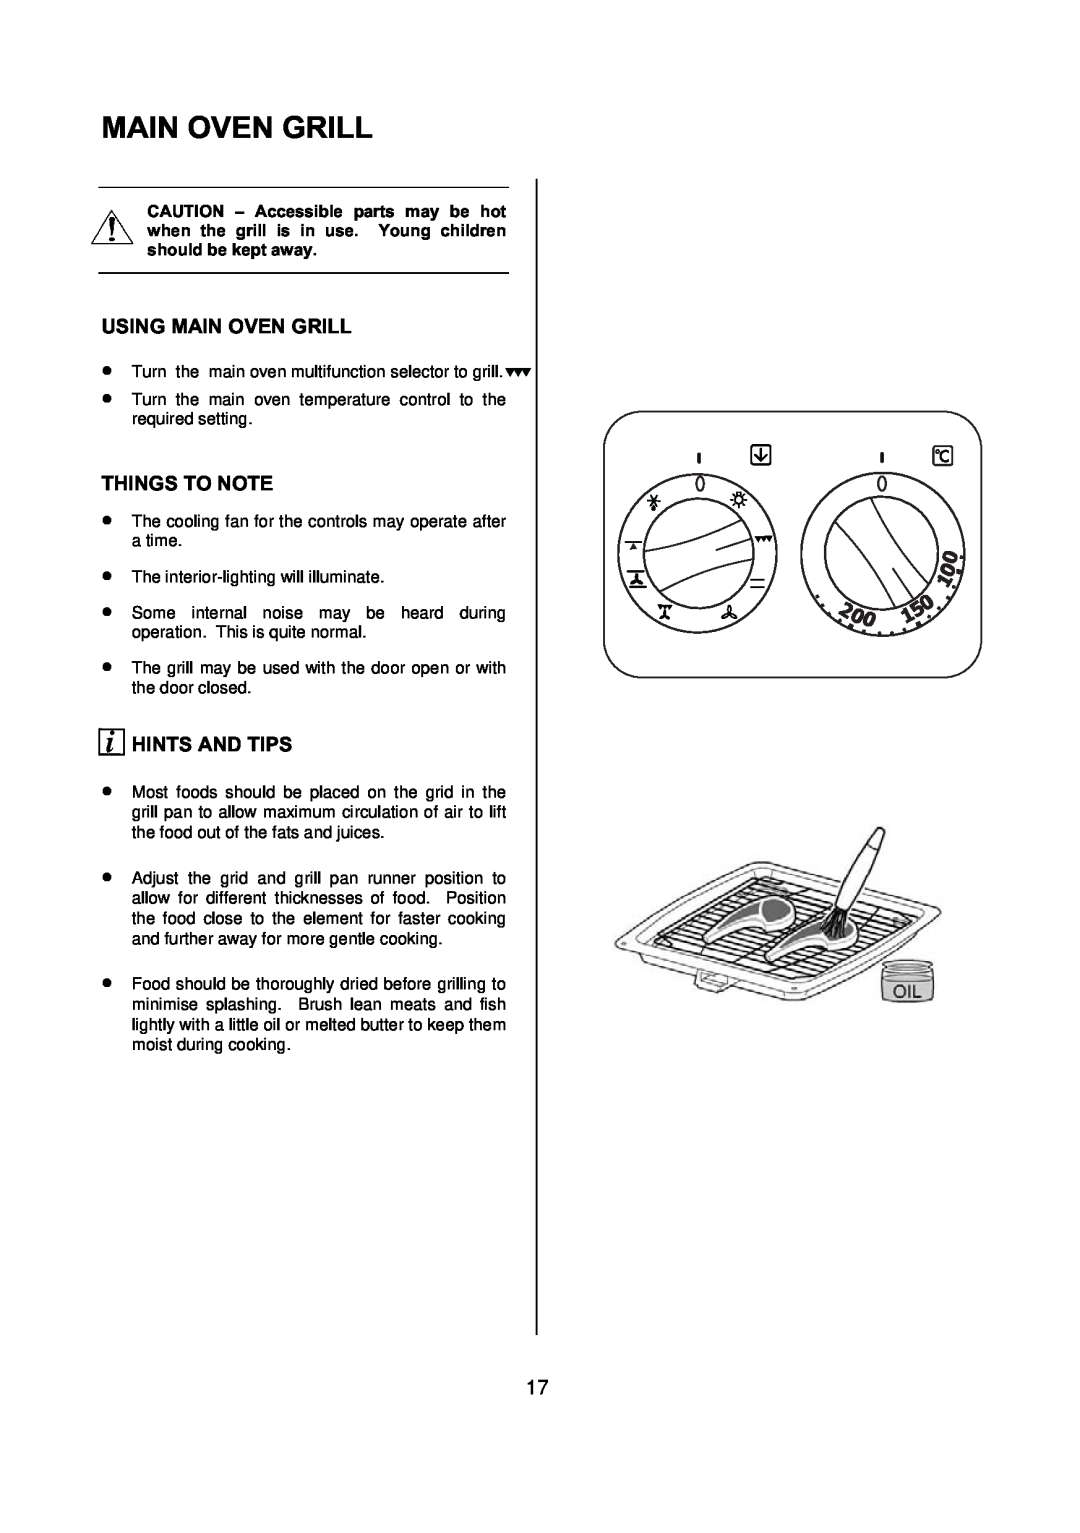 Electrolux D77000 user manual Using Main Oven Grill, Things To Note, Hints And Tips 